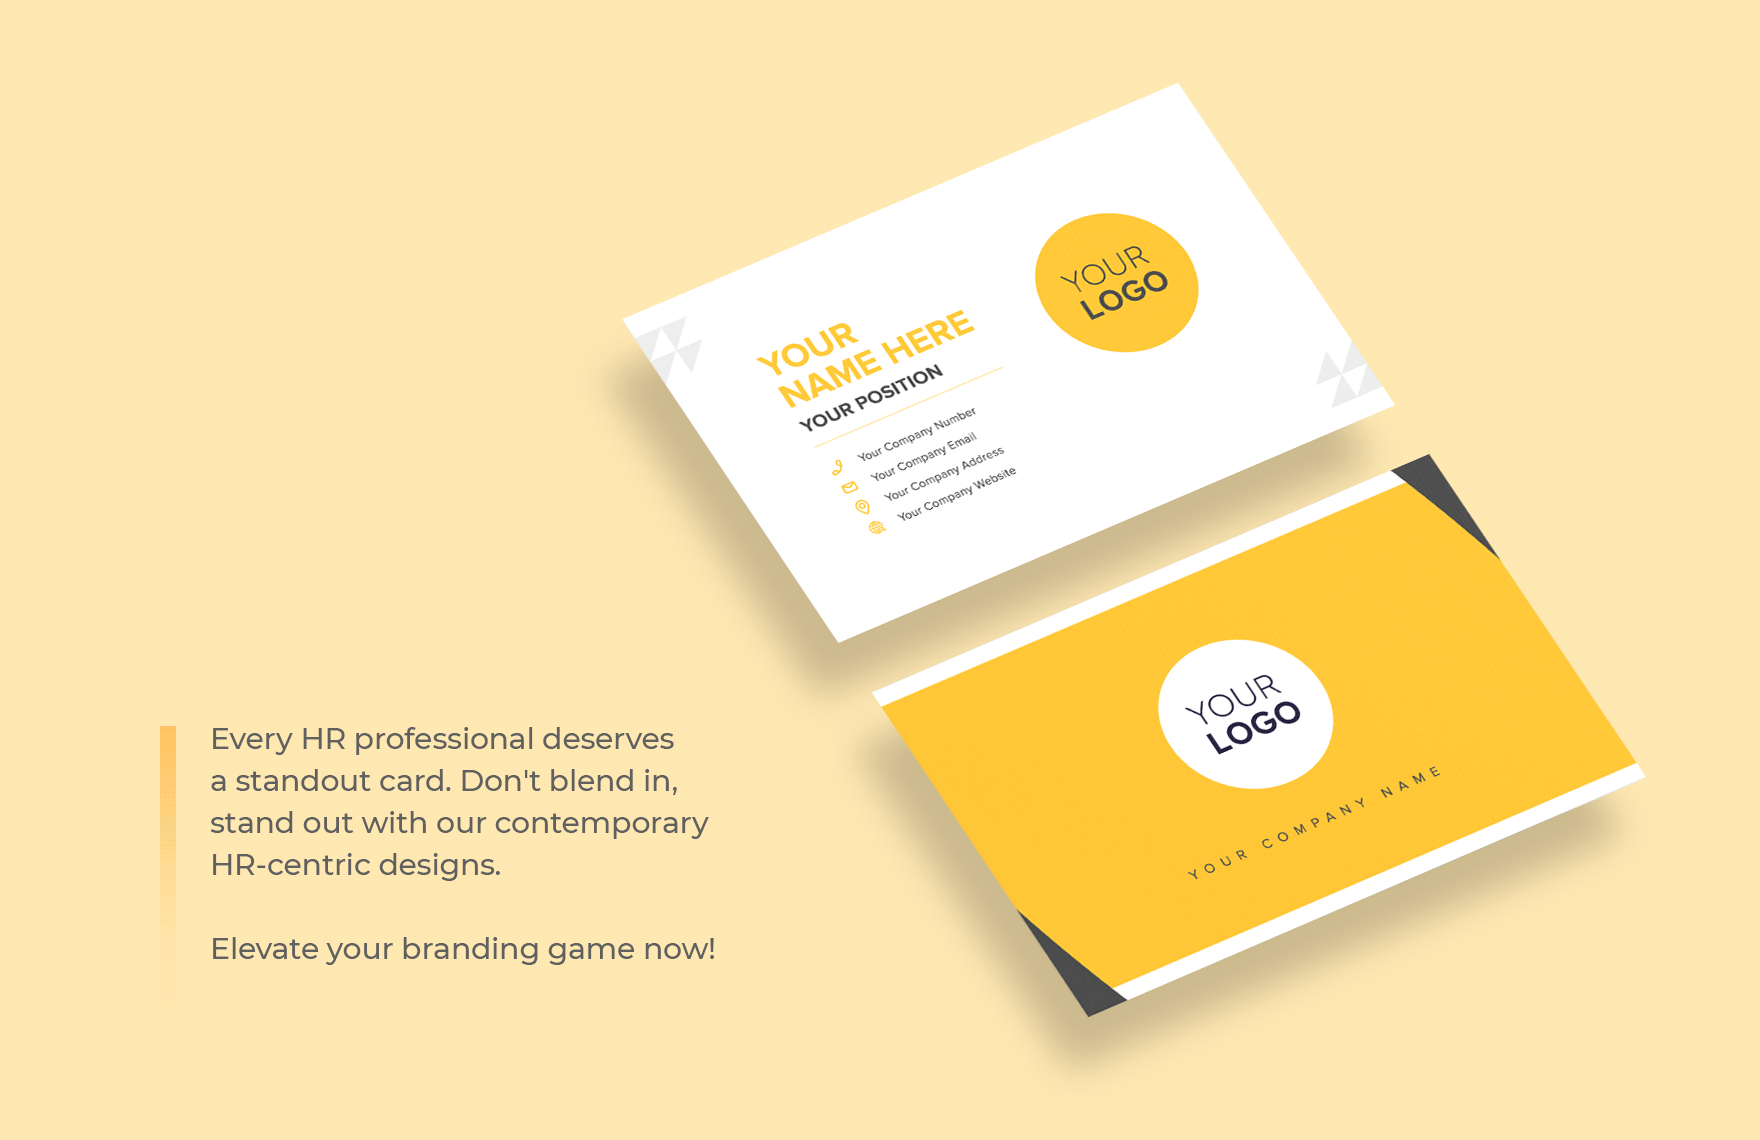 IT Manager Business Card Template